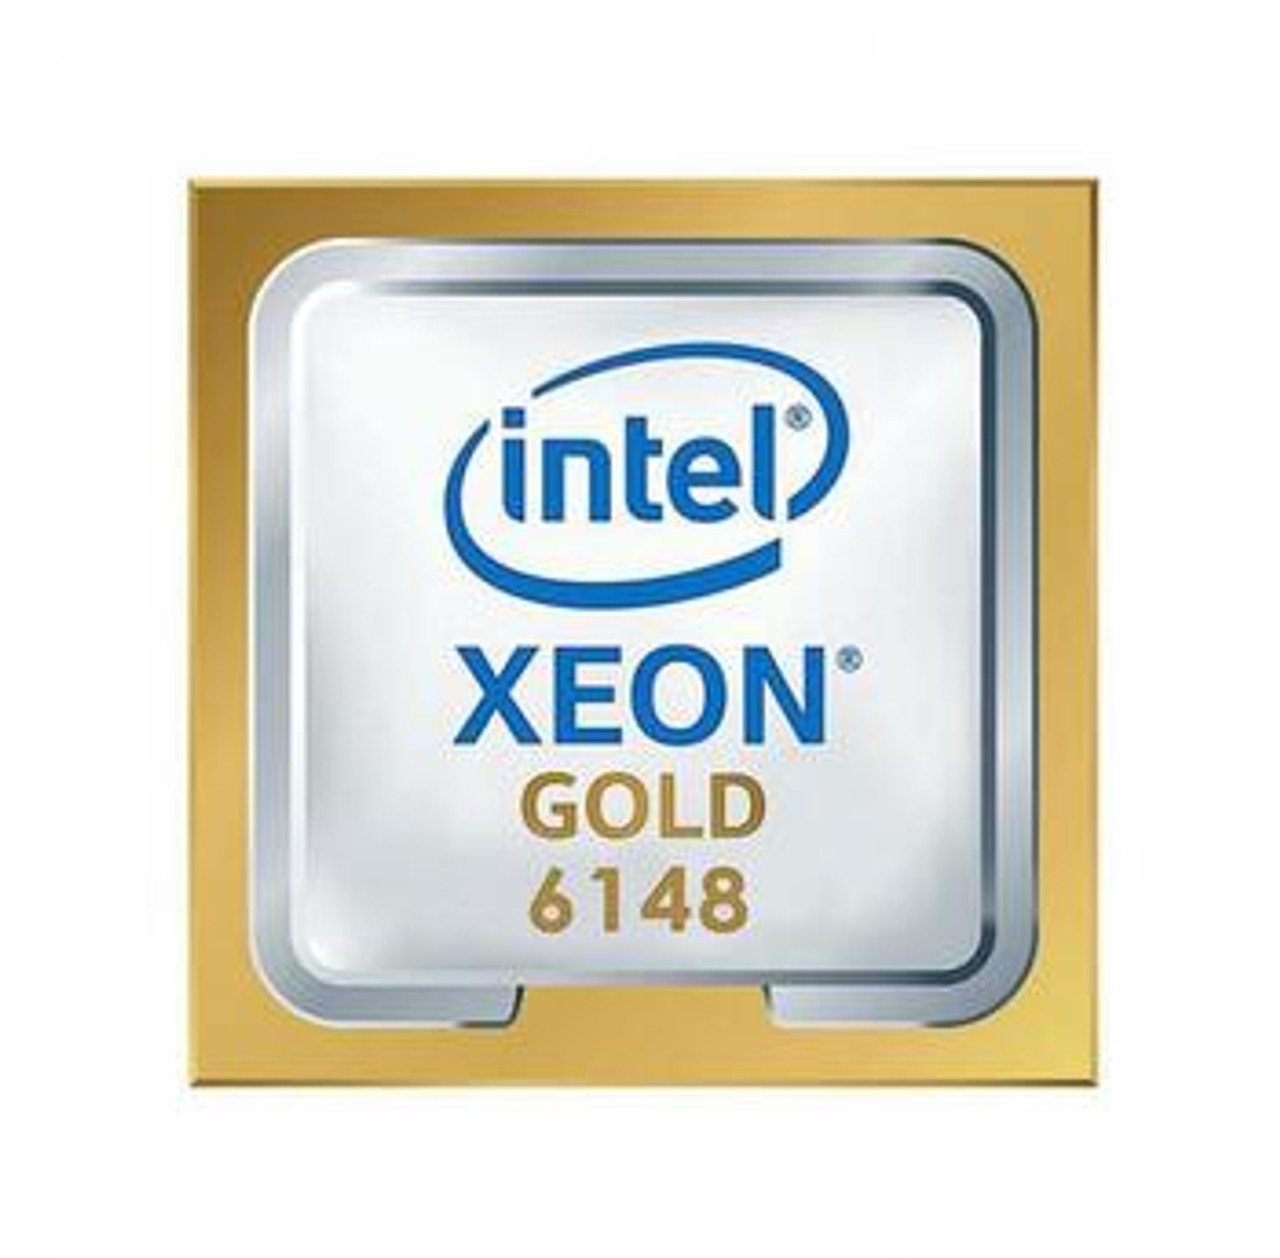 MXCY0 Dell 2.40GHz 10.40GT/s UPI 27.5MB L3 Cache Intel Xeon Gold 6148 20-Core Processor Upgrade Mfr